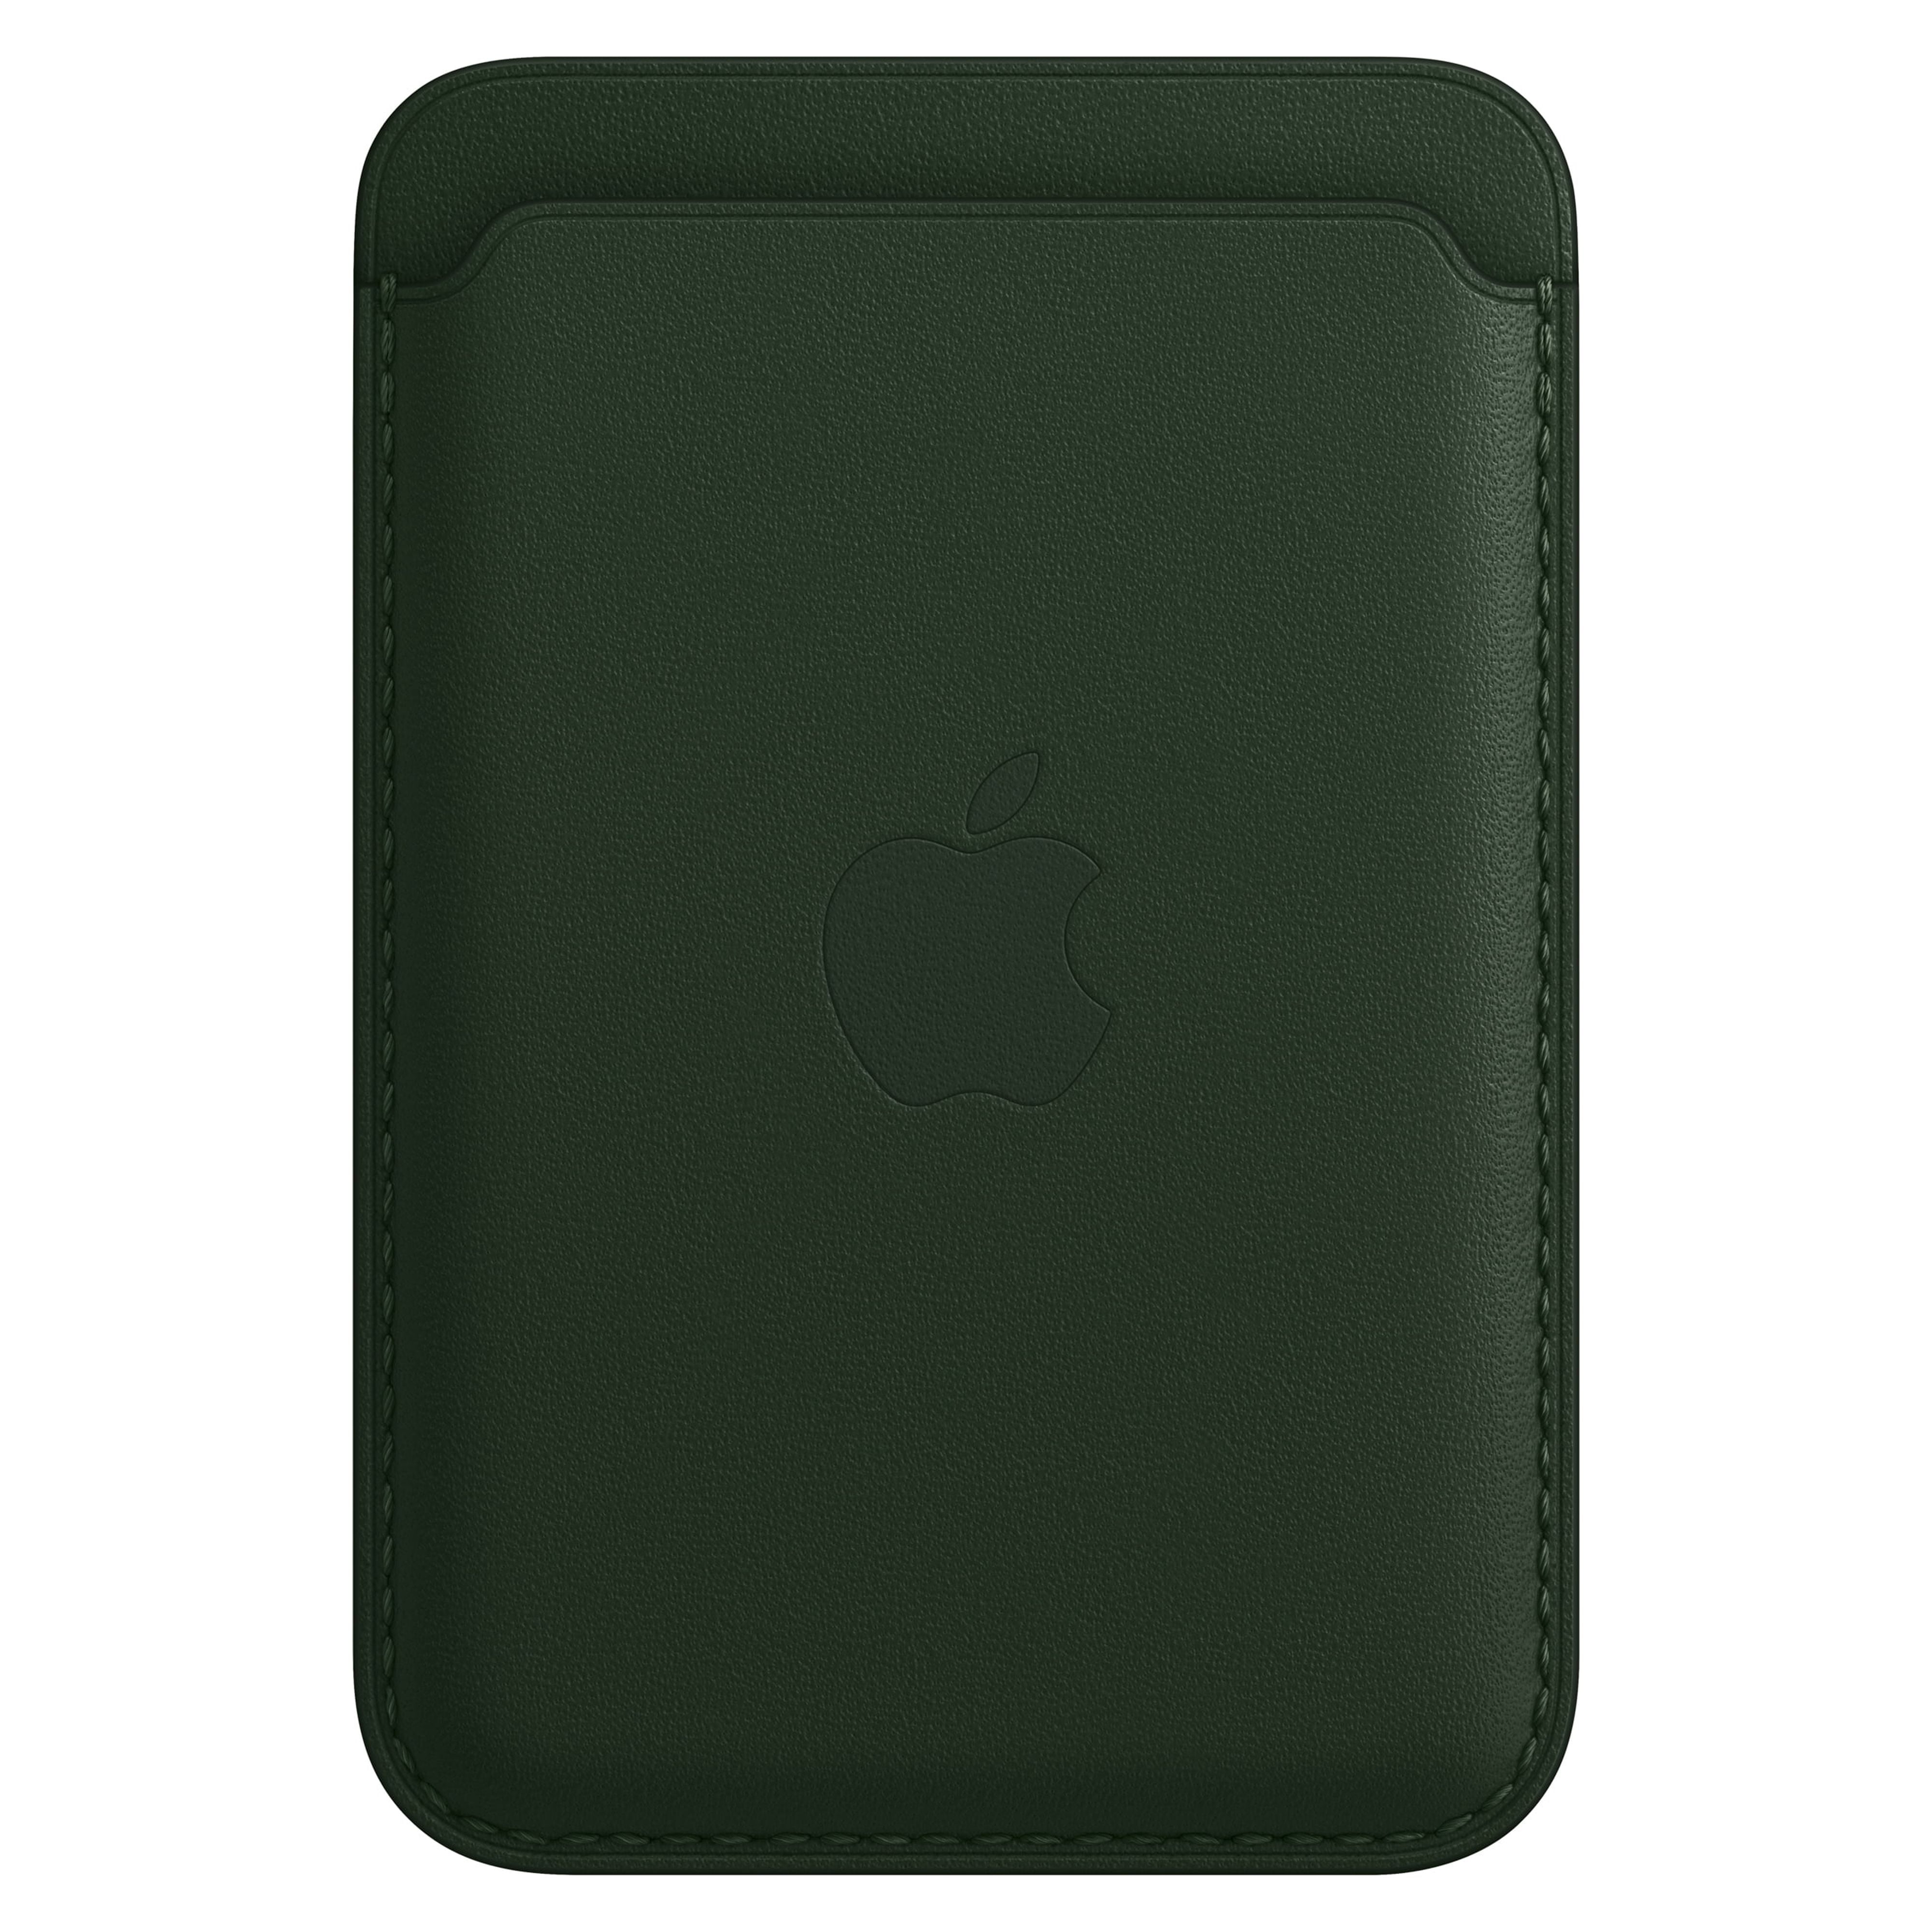 Apple iPhone Leather MagSafe Wallet Green for Sale in Long Beach